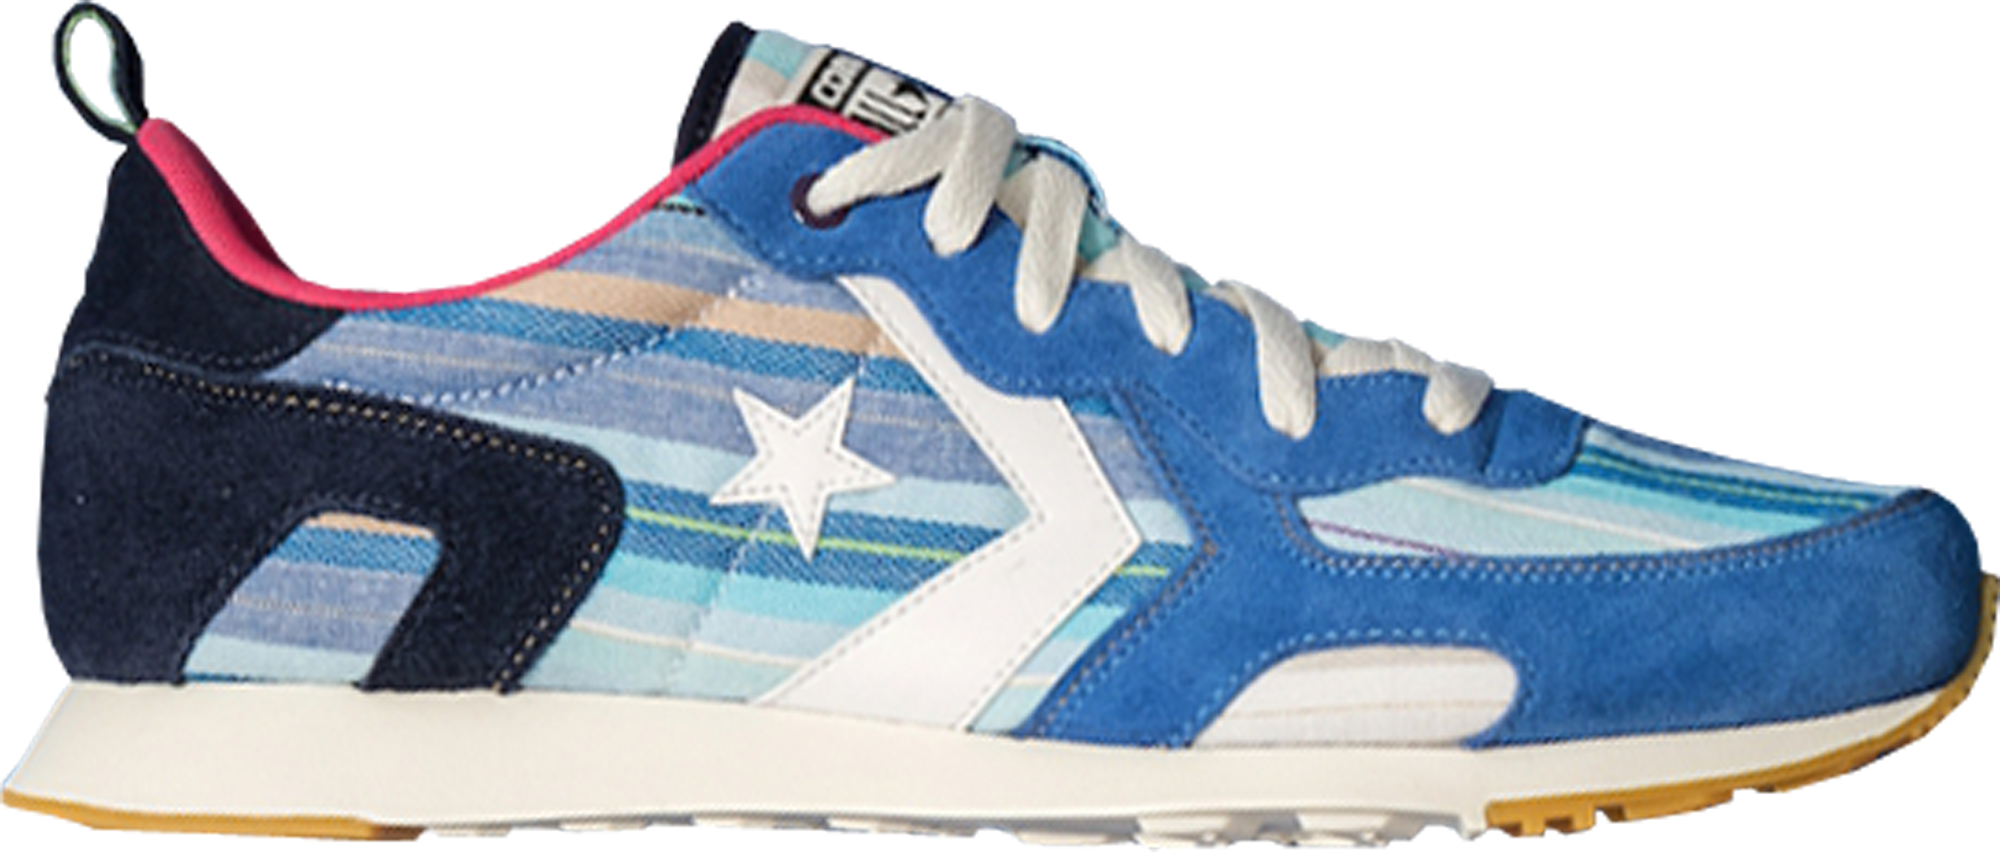 converse thunderbolt ox 84 trainers